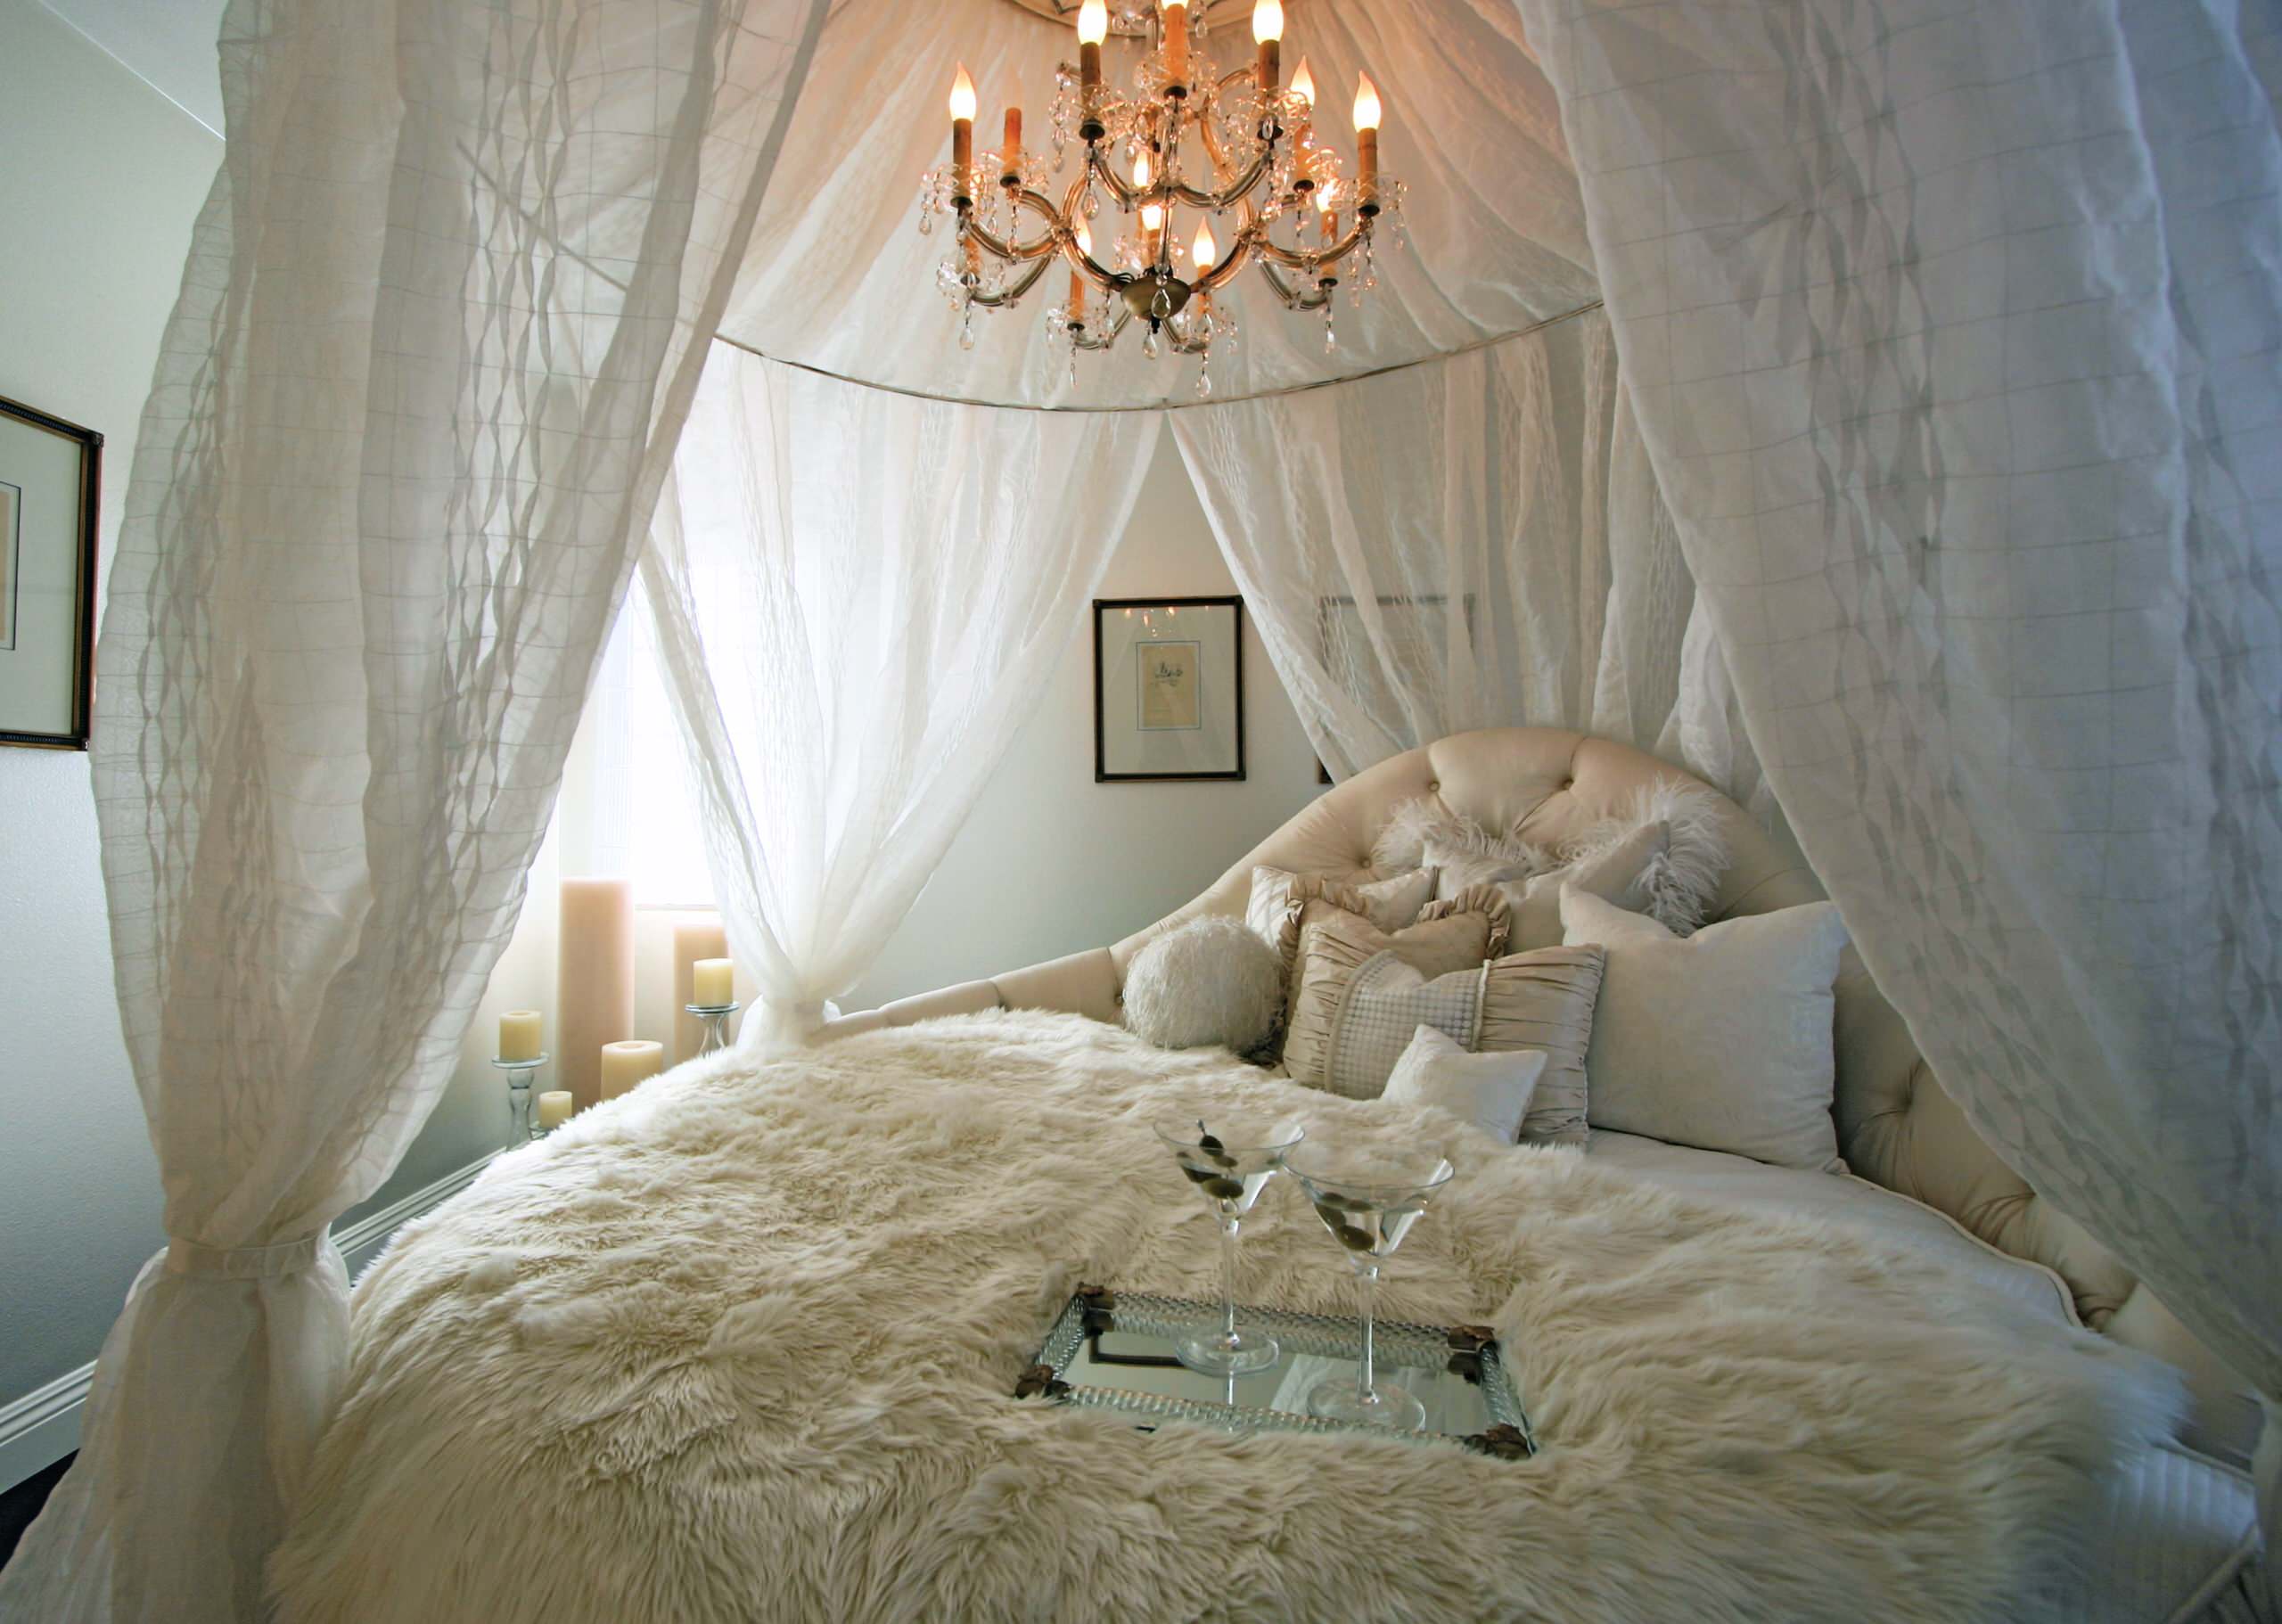 Bed Canopy with Chandelier